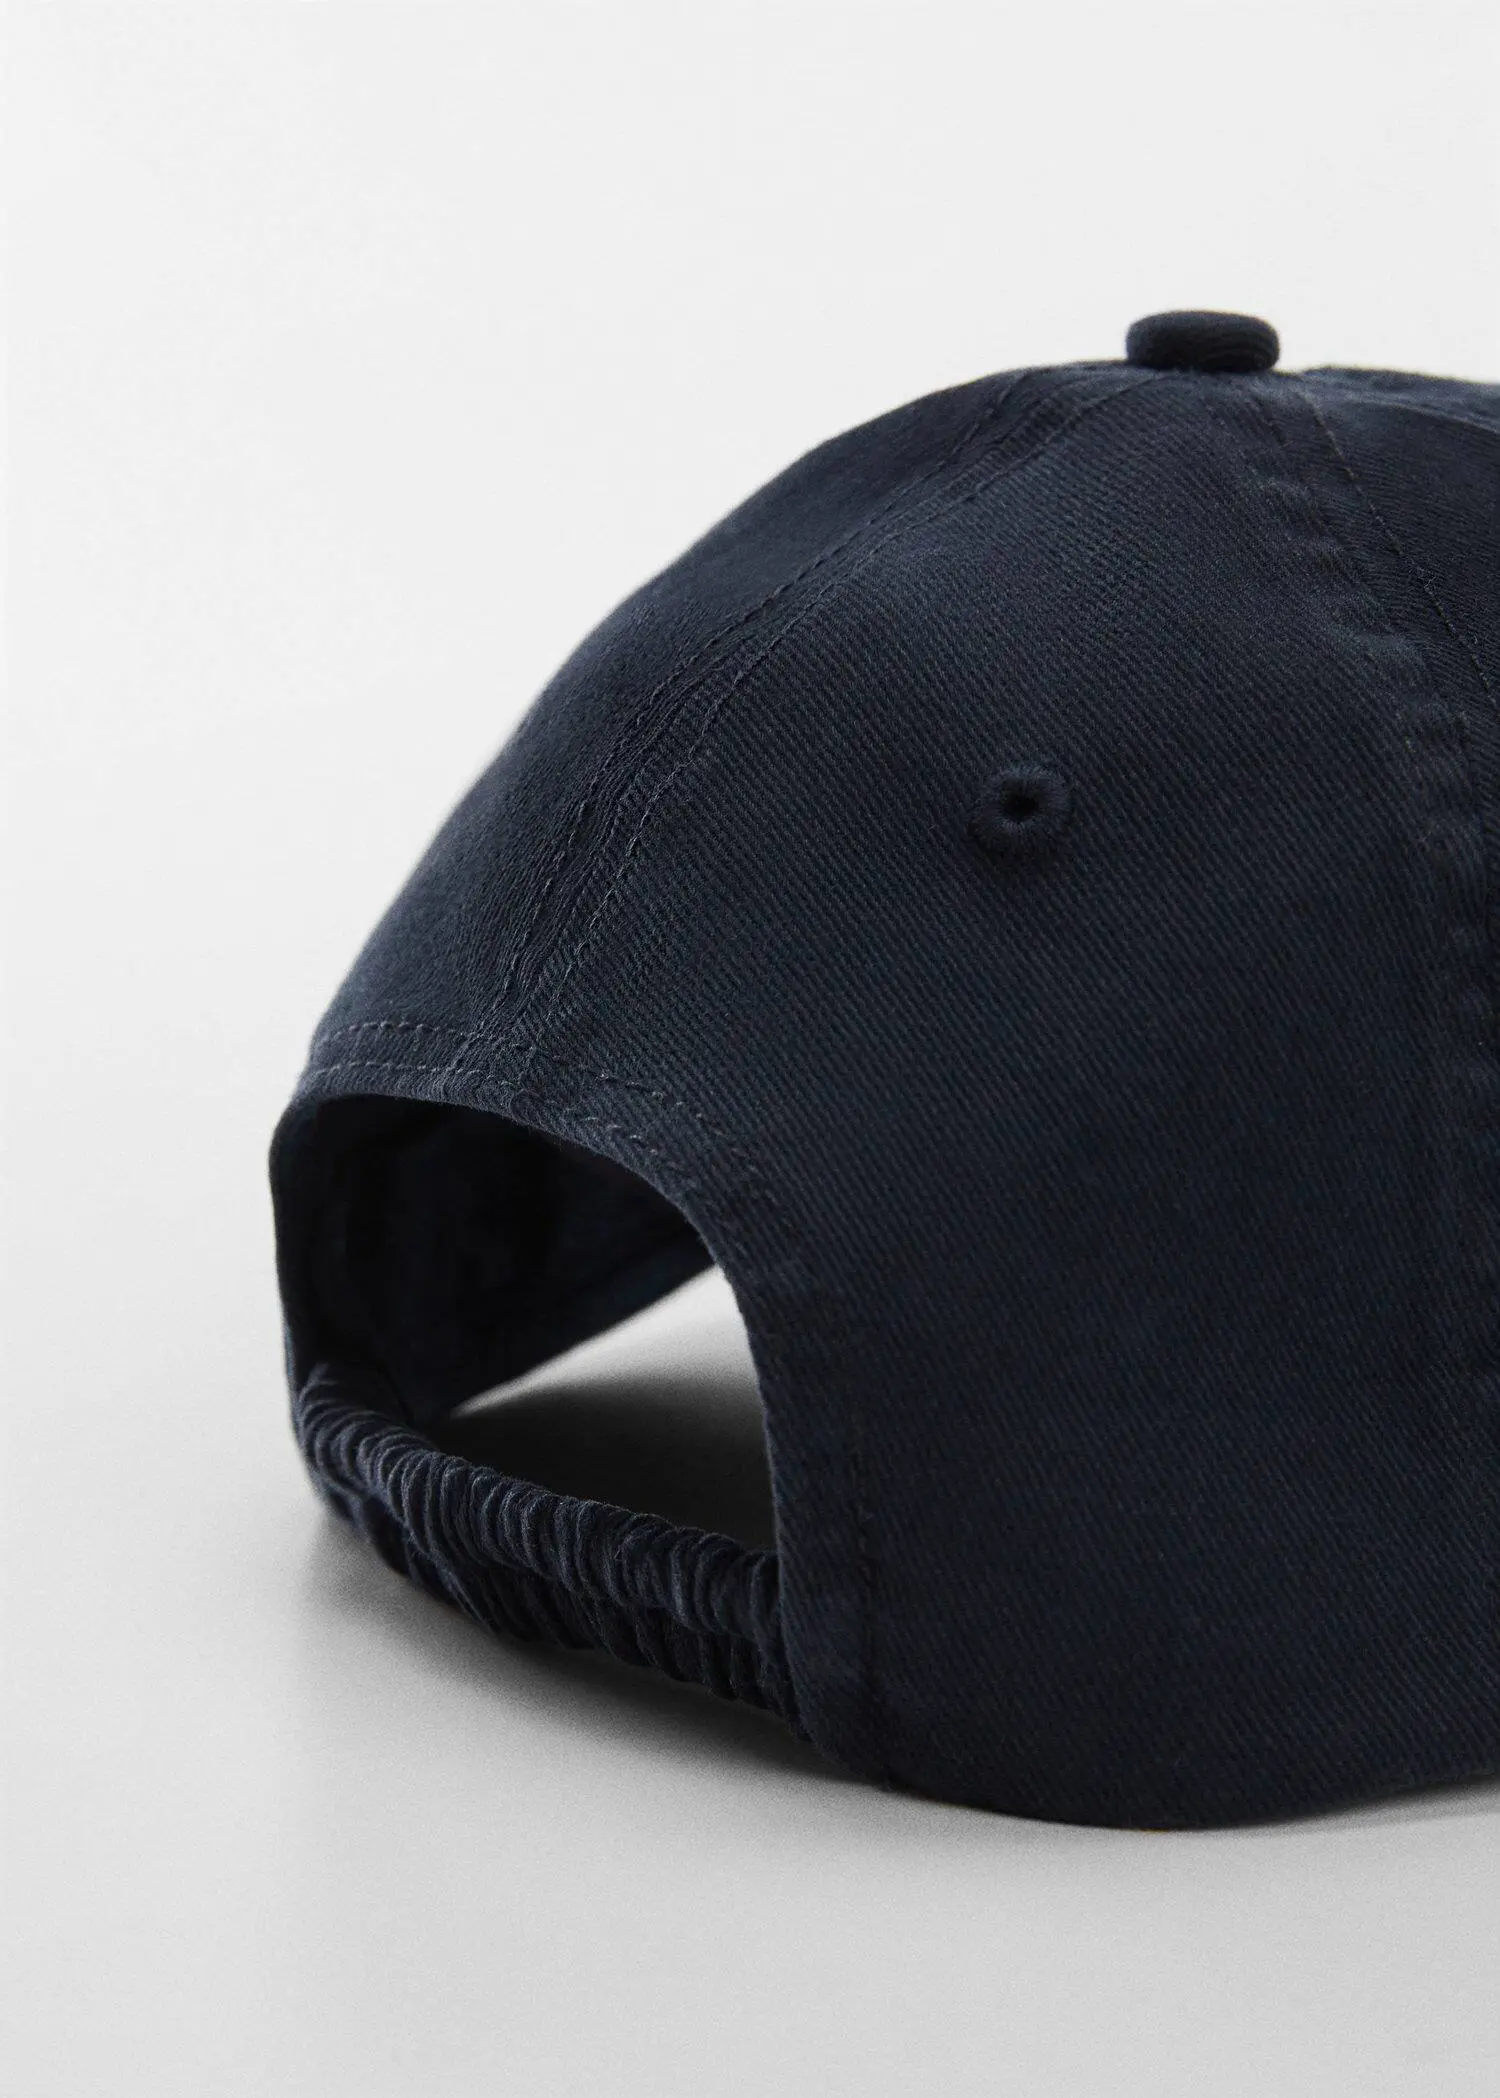 Mango Organic cotton cap. a close-up of a baseball cap on top of a white surface. 